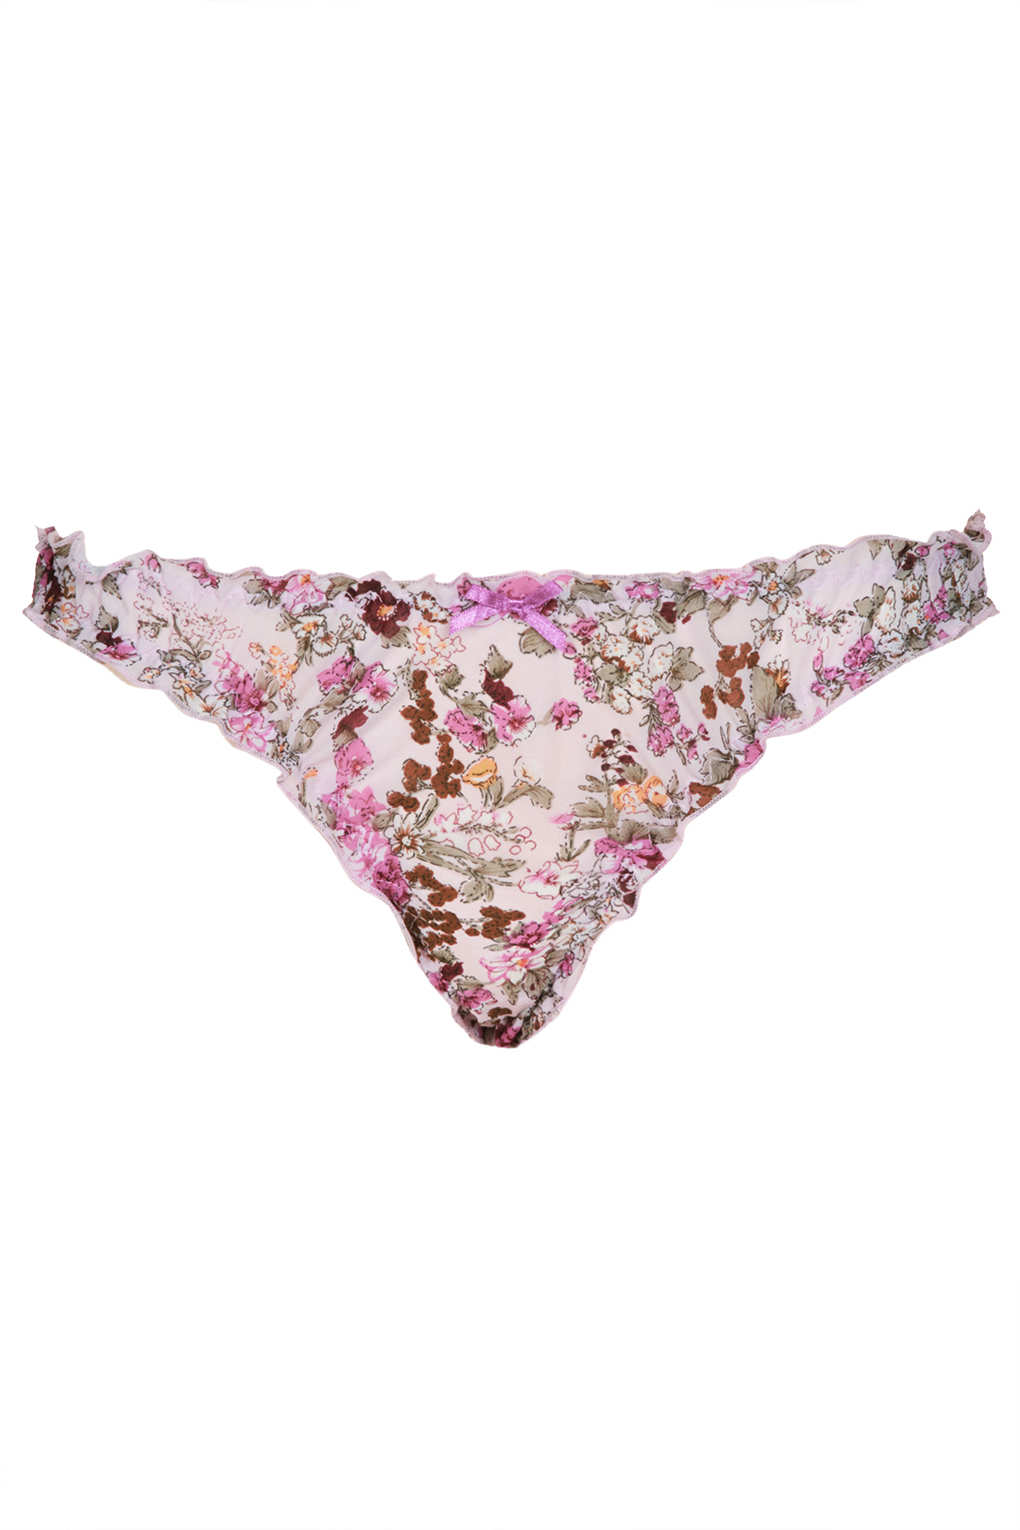 Topshop Hedgerow Floral Mini Knickers in Pink (PALE PINK) | Lyst